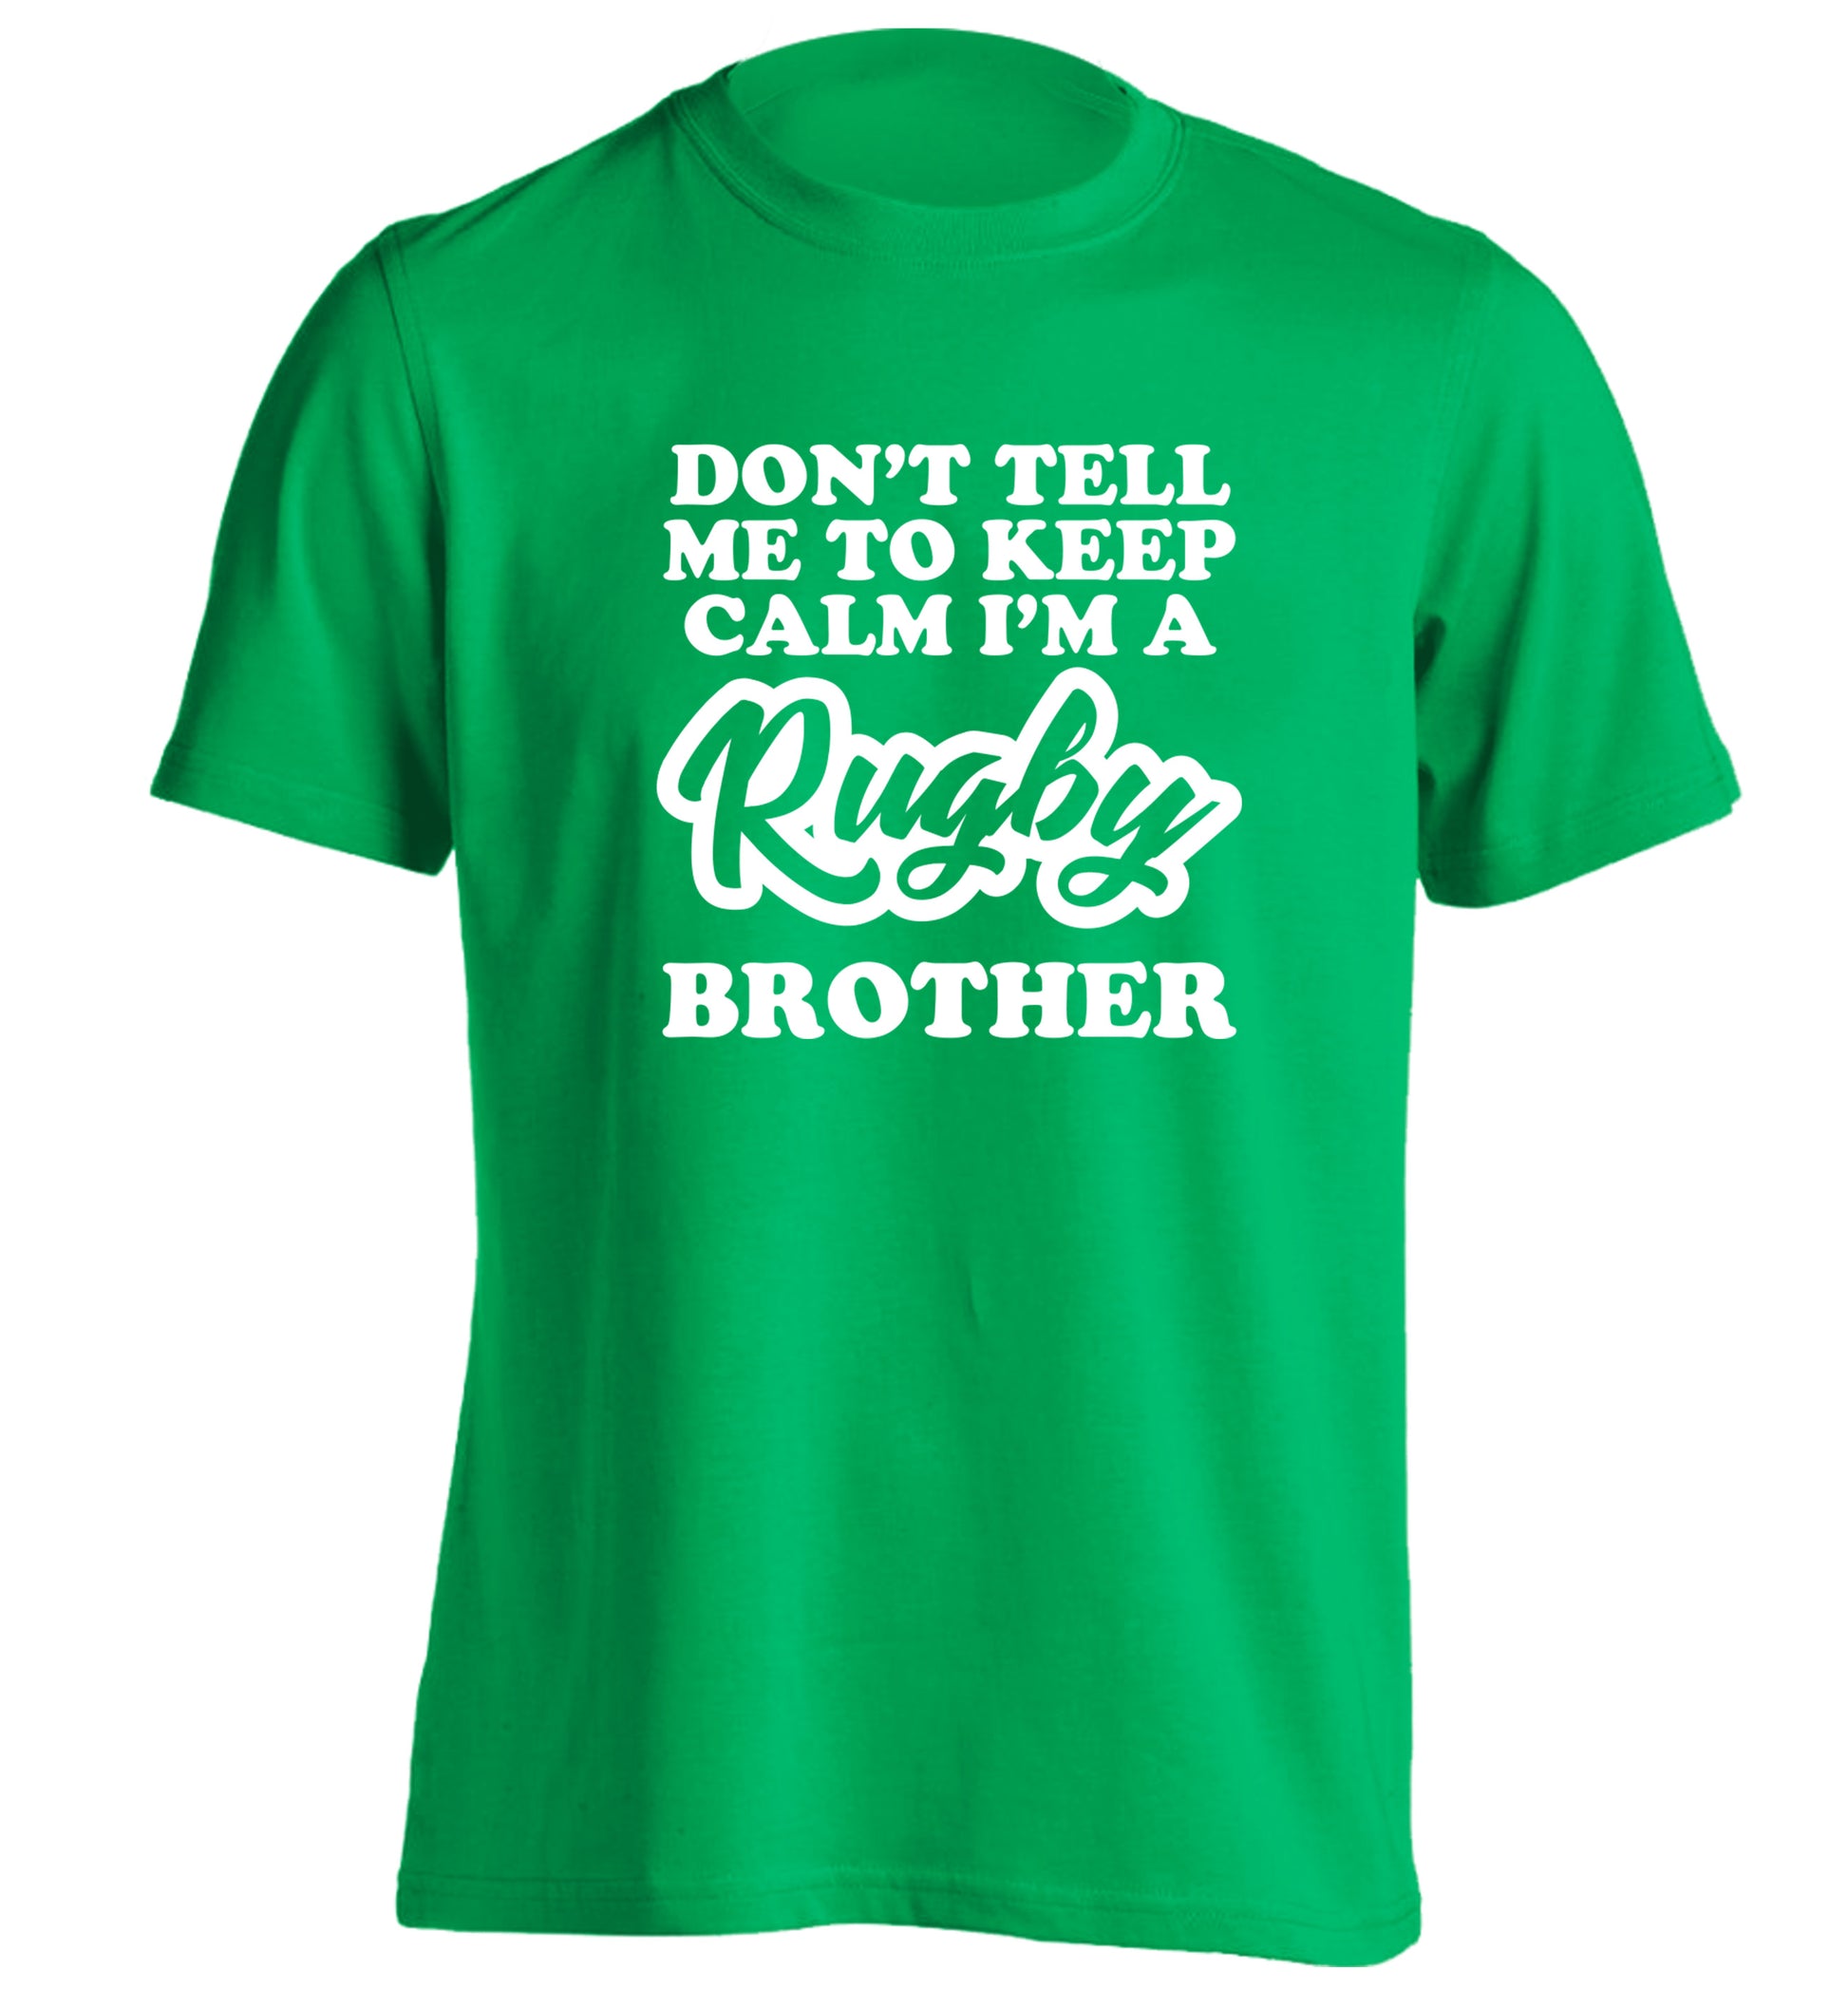 Don't tell me keep calm I'm a rugby brother adults unisex green Tshirt 2XL